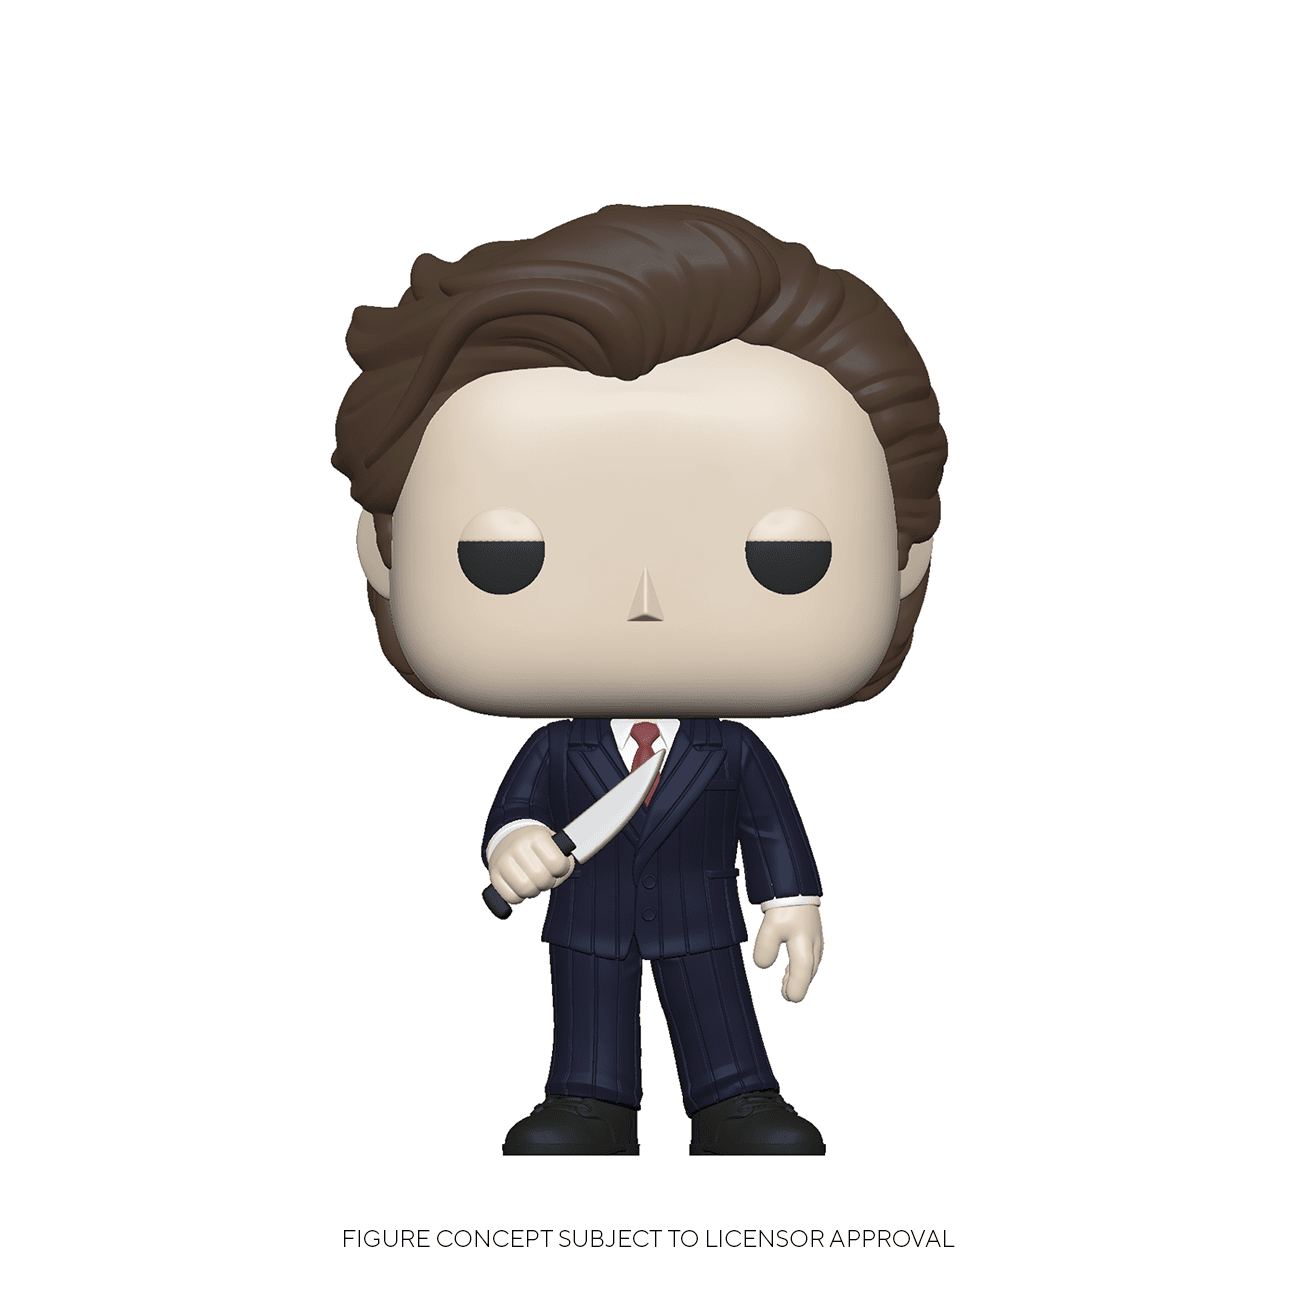 Funko Pop! Patrick in Suite with Knife and Business Card (American Psycho)